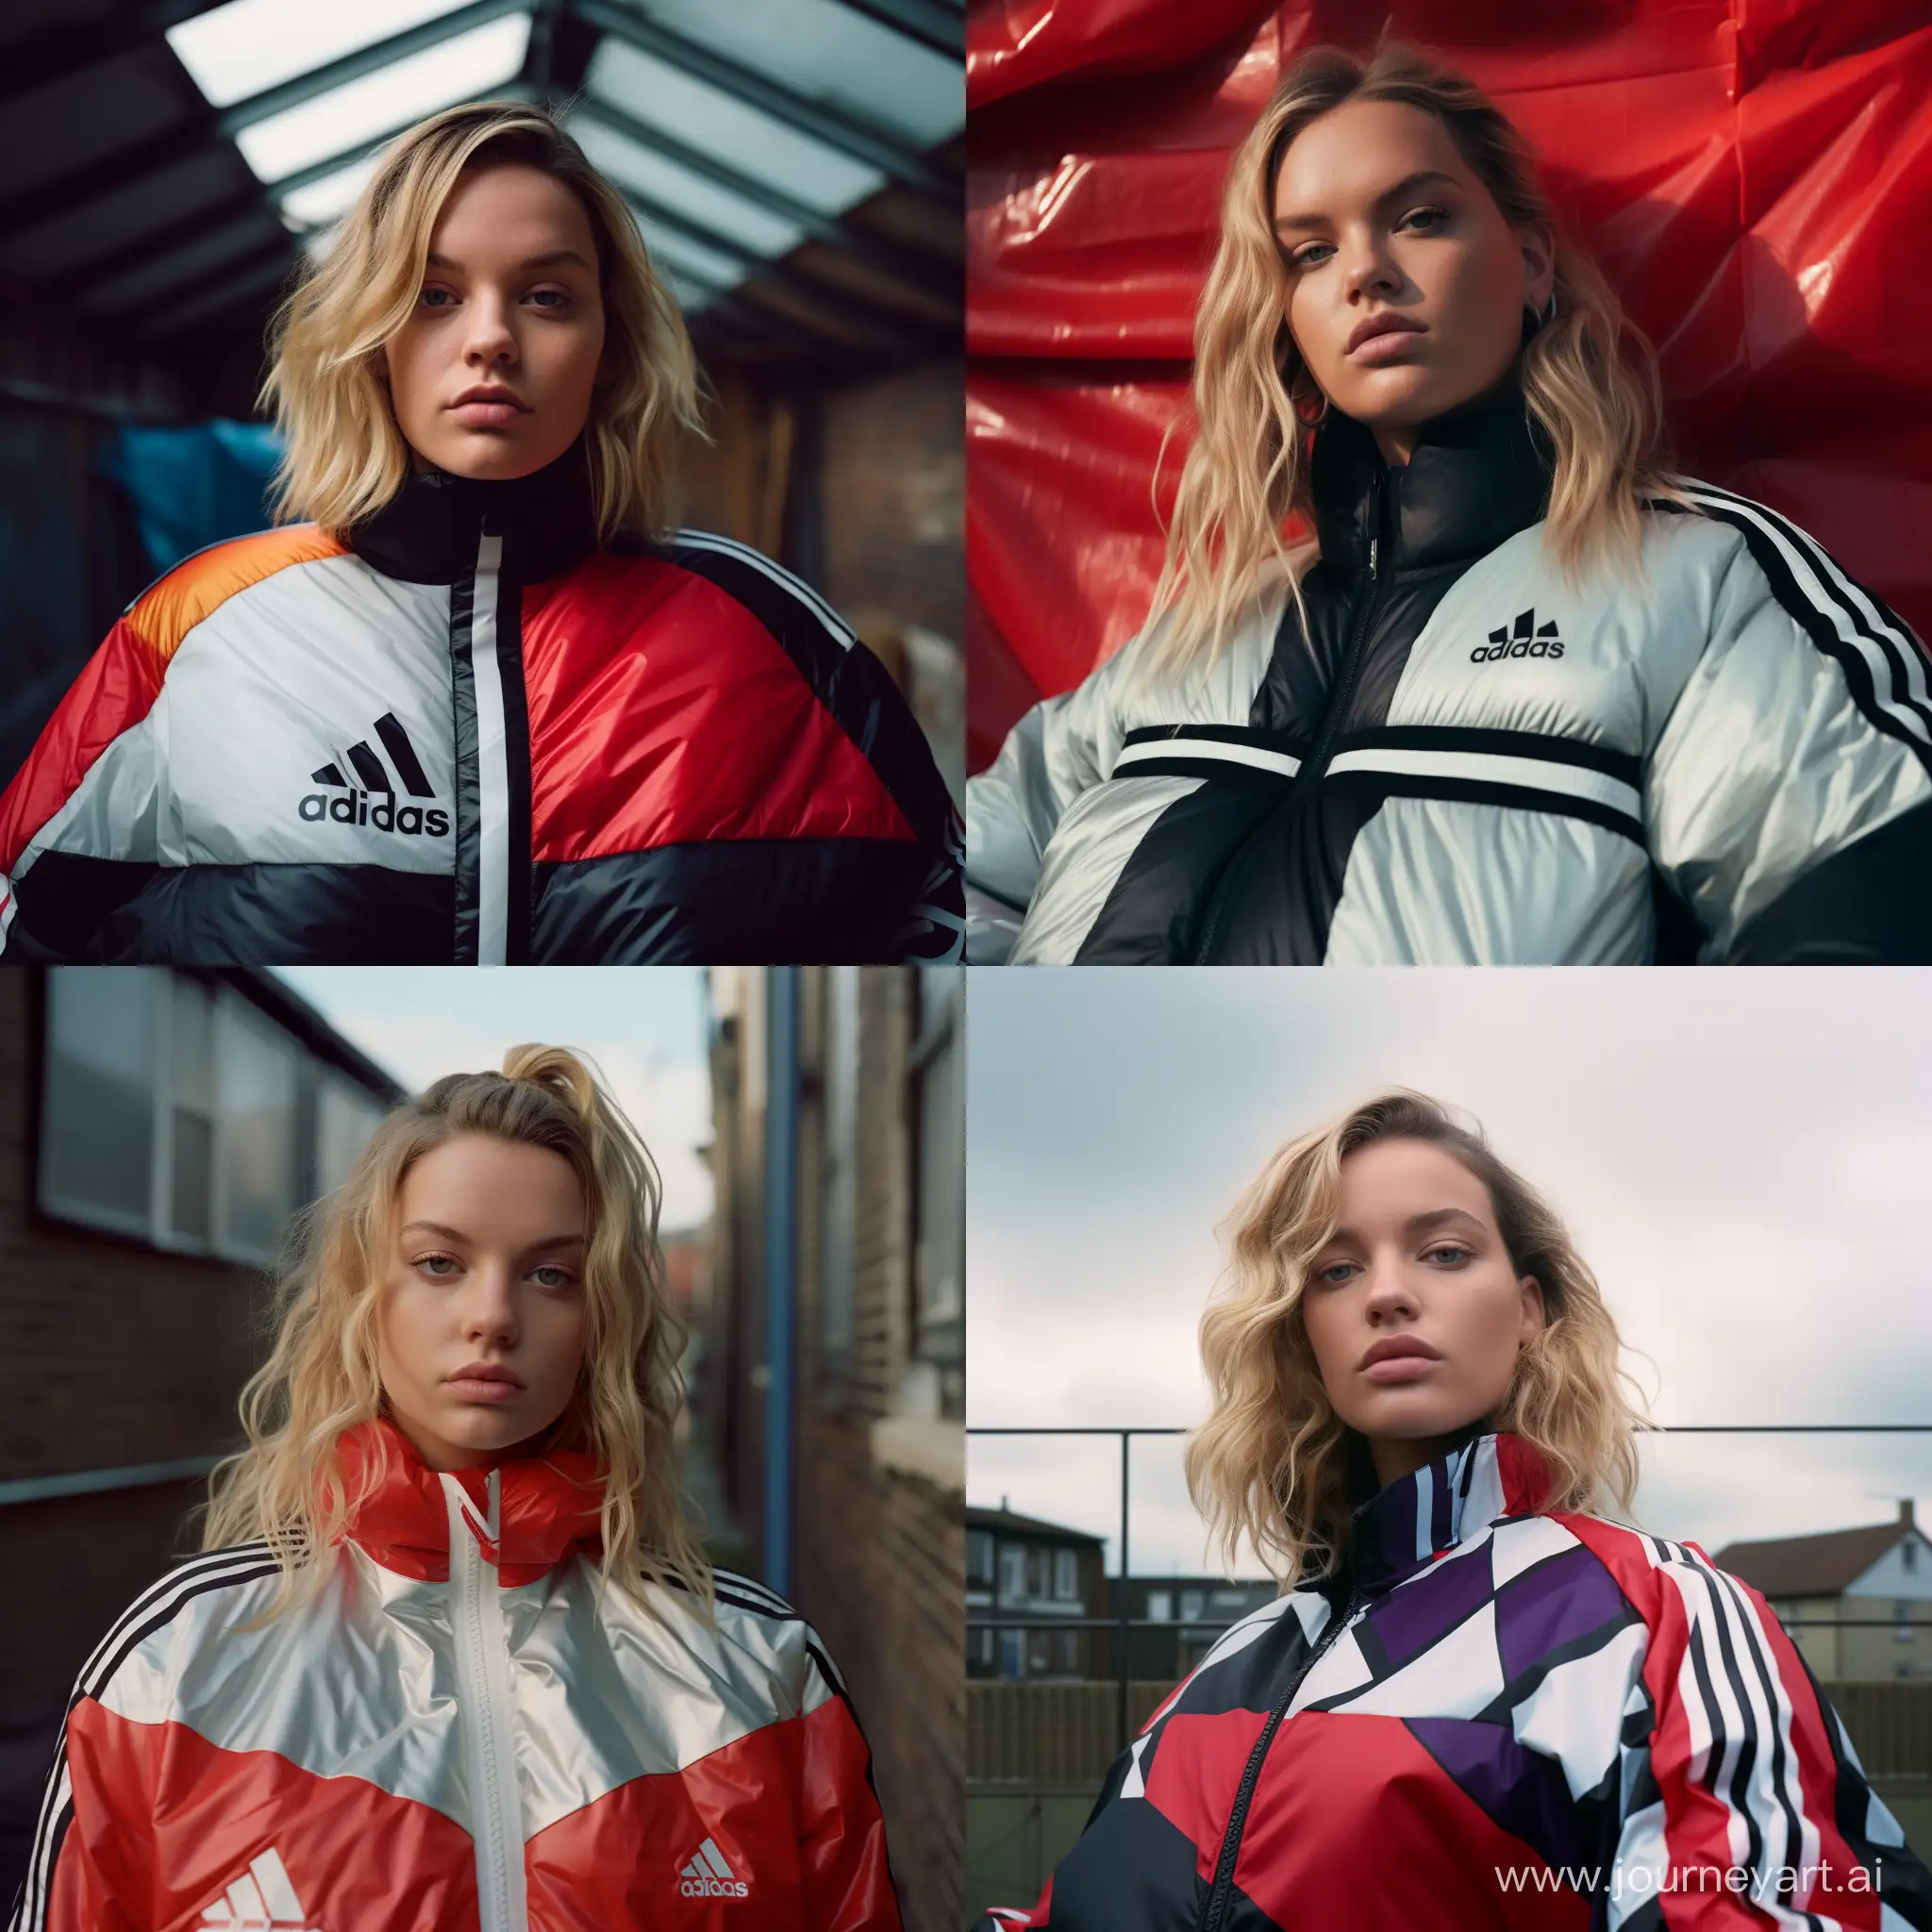 Eccentric-Dutch-Woman-in-Bold-Color-Block-Adidas-Windbreaker-and-Sumo-Inflatable-Fat-Suit